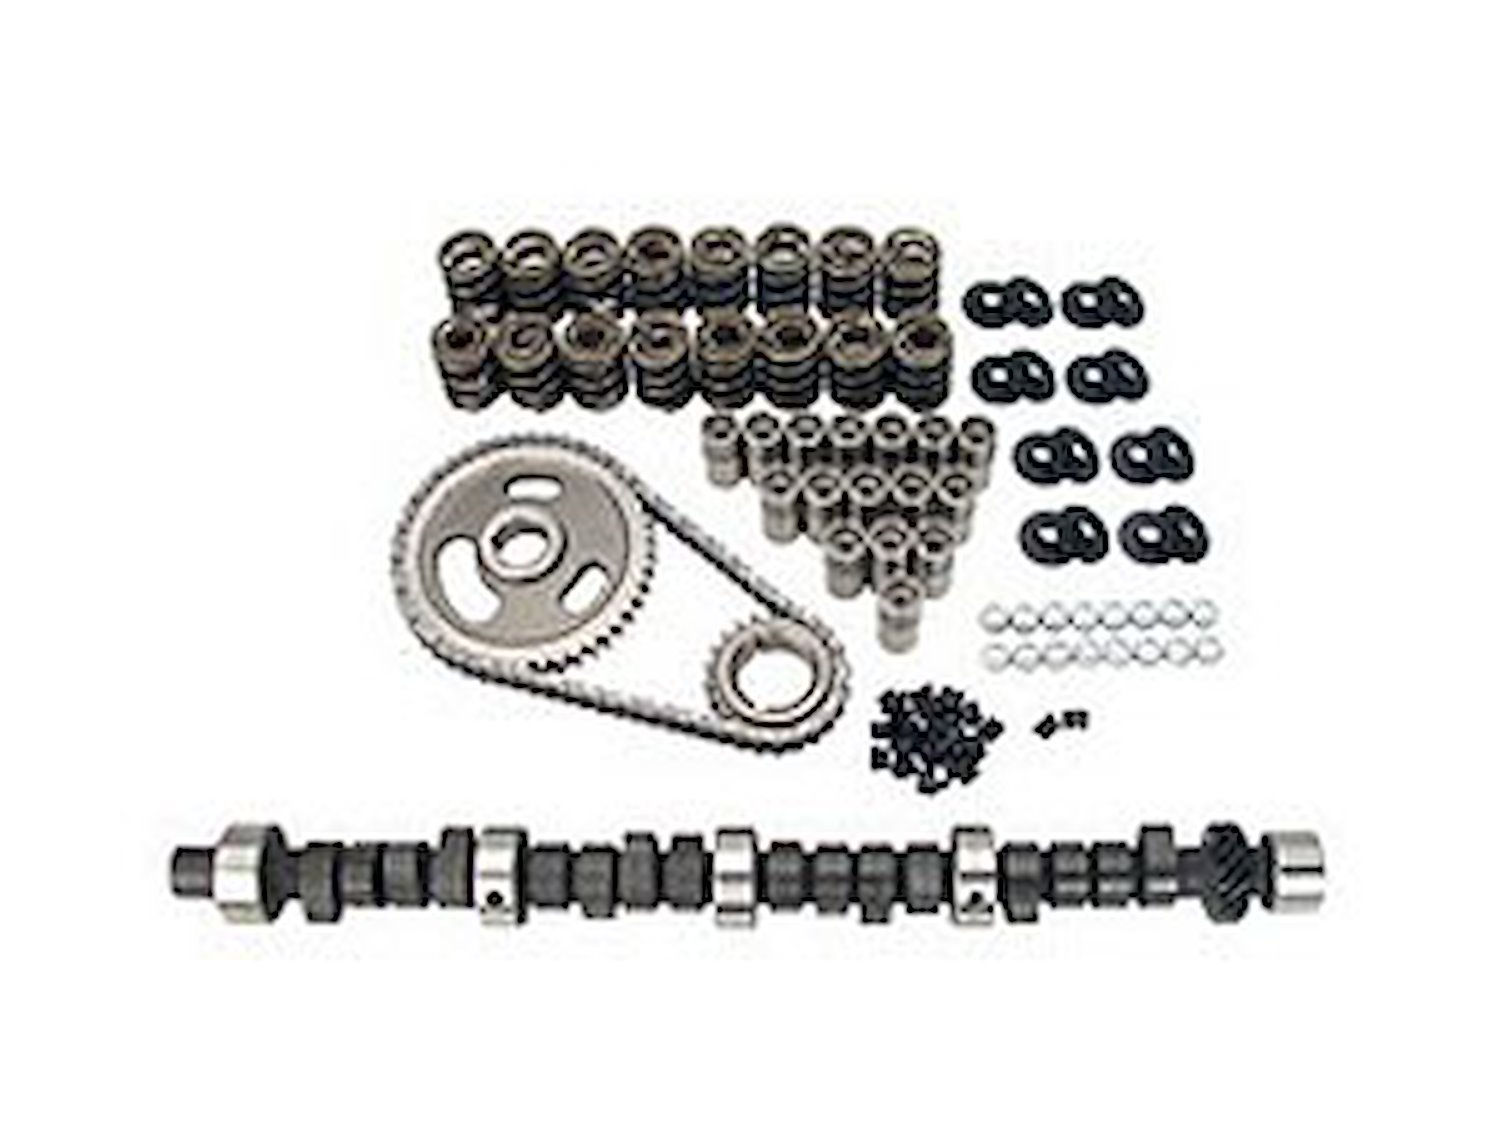 Xtreme Energy 262H Hydraulic Flat Tappet Camshaft Complete Kit Lift .462"/.470" Duration 262°/270° RPM Range 1300-5600